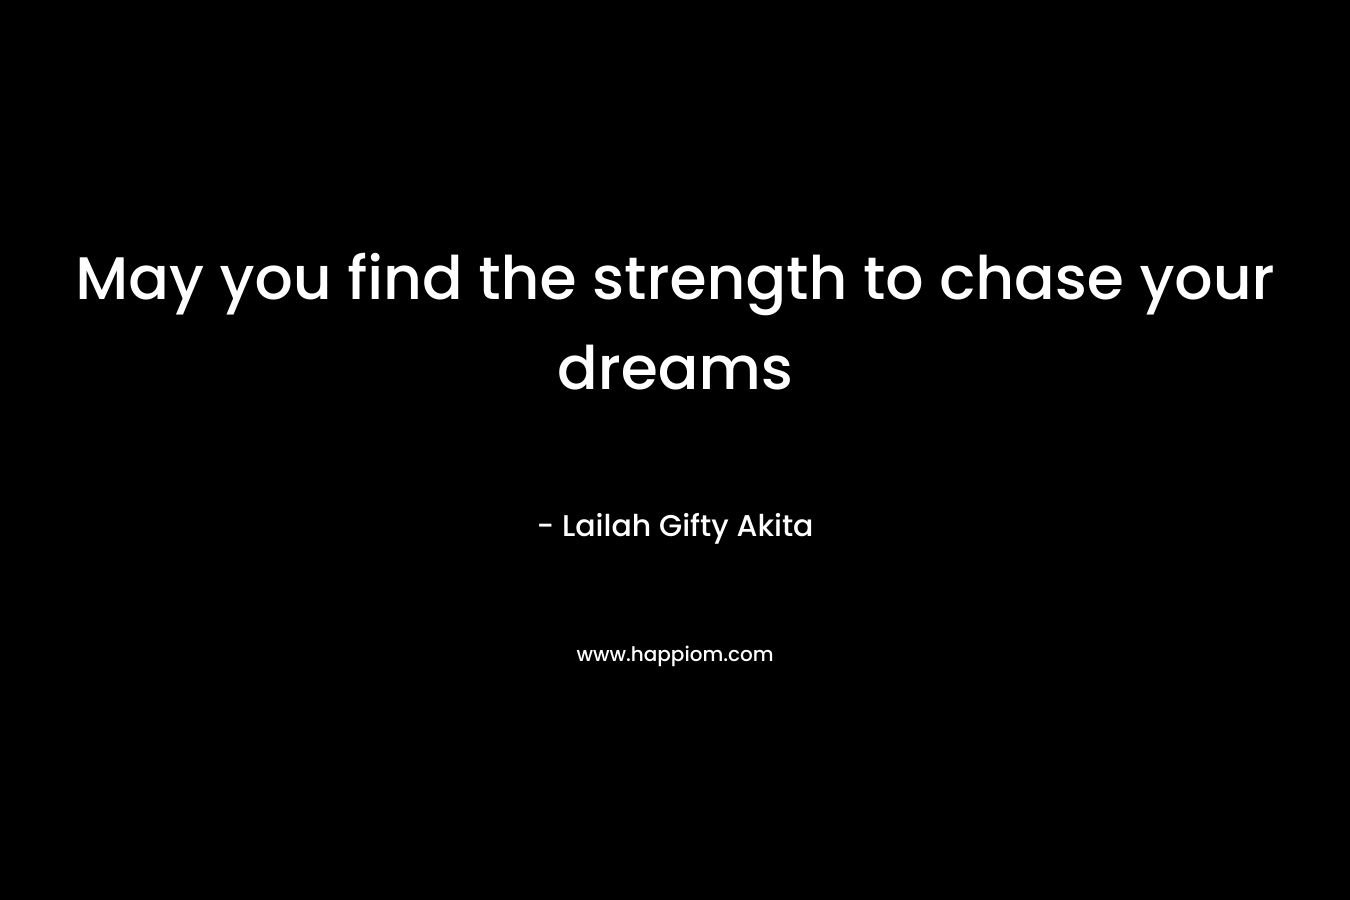 May you find the strength to chase your dreams